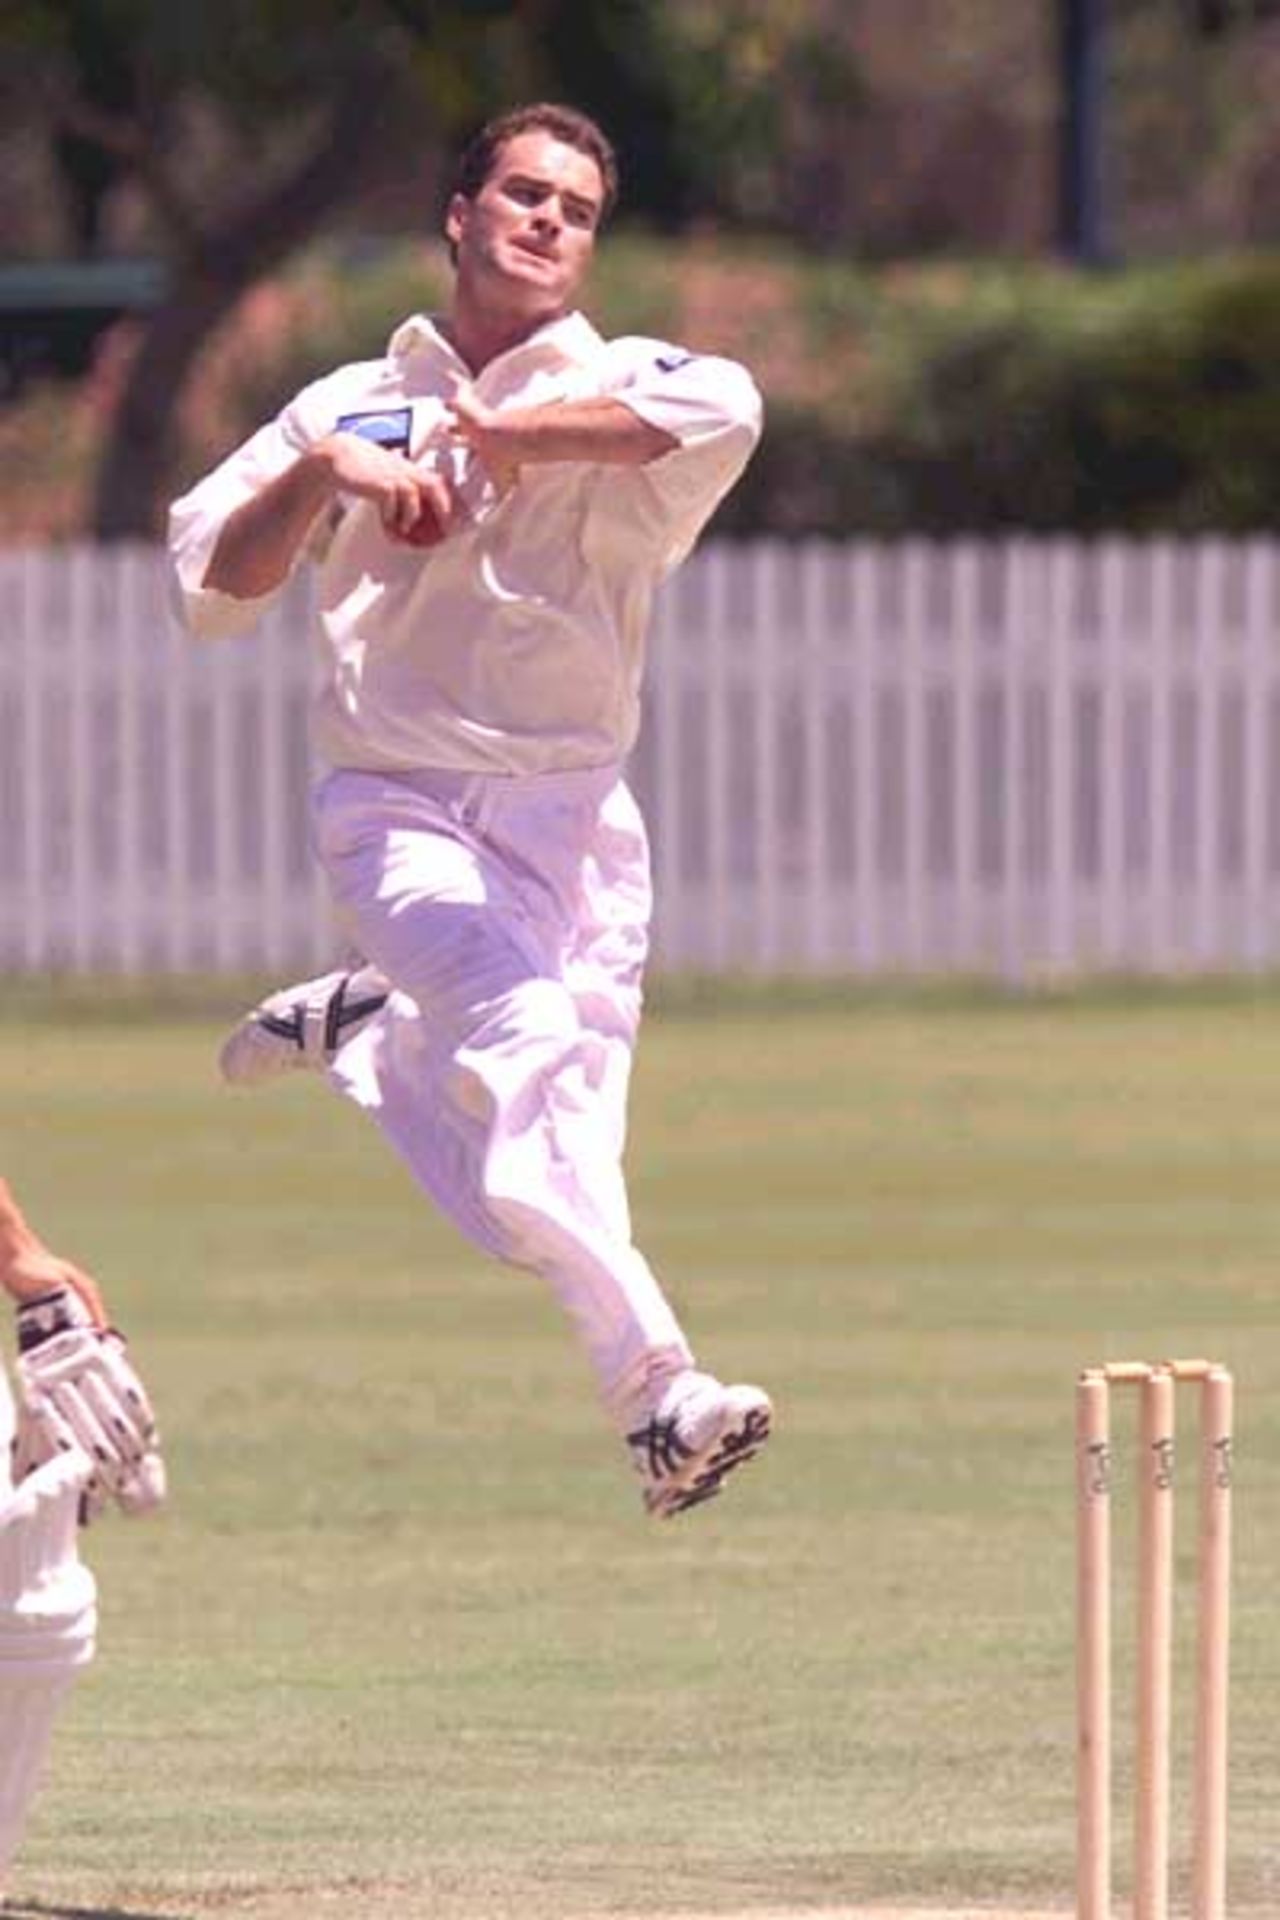 18 Oct 2001: Dion Nash of New Zealand in action during the match between New Zealand and the Queensland XI played at the Allan Border Field, Brisbane, Australia.